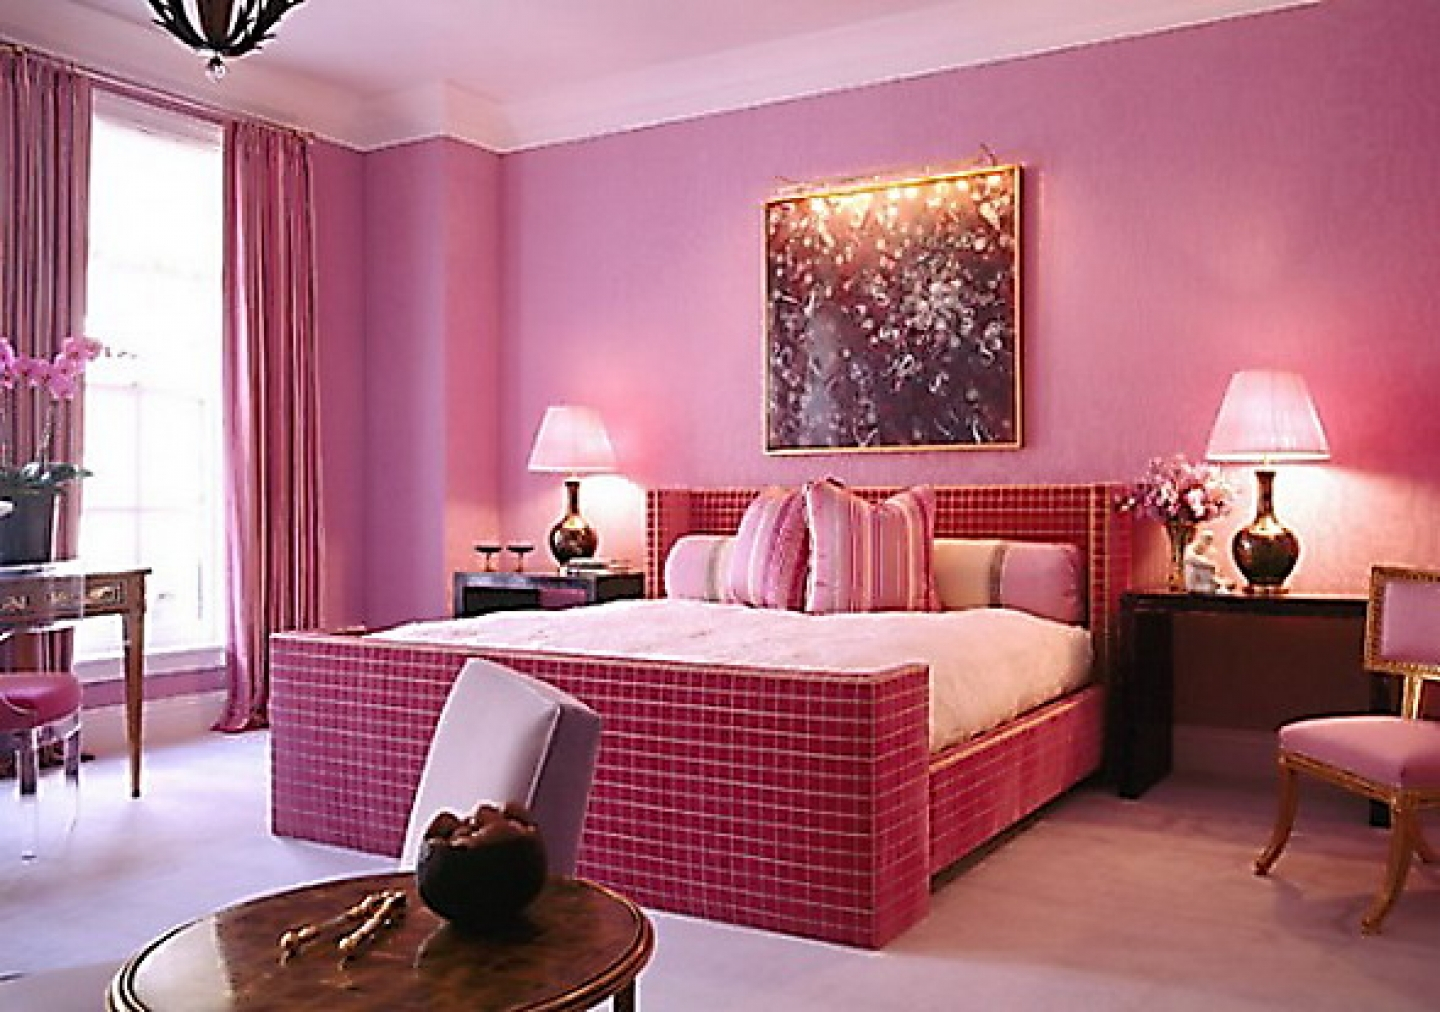 Bedroom Beautiful Pink Bedroom Paint Colors 7 House Design Ideas within sizing 1440 X 1012